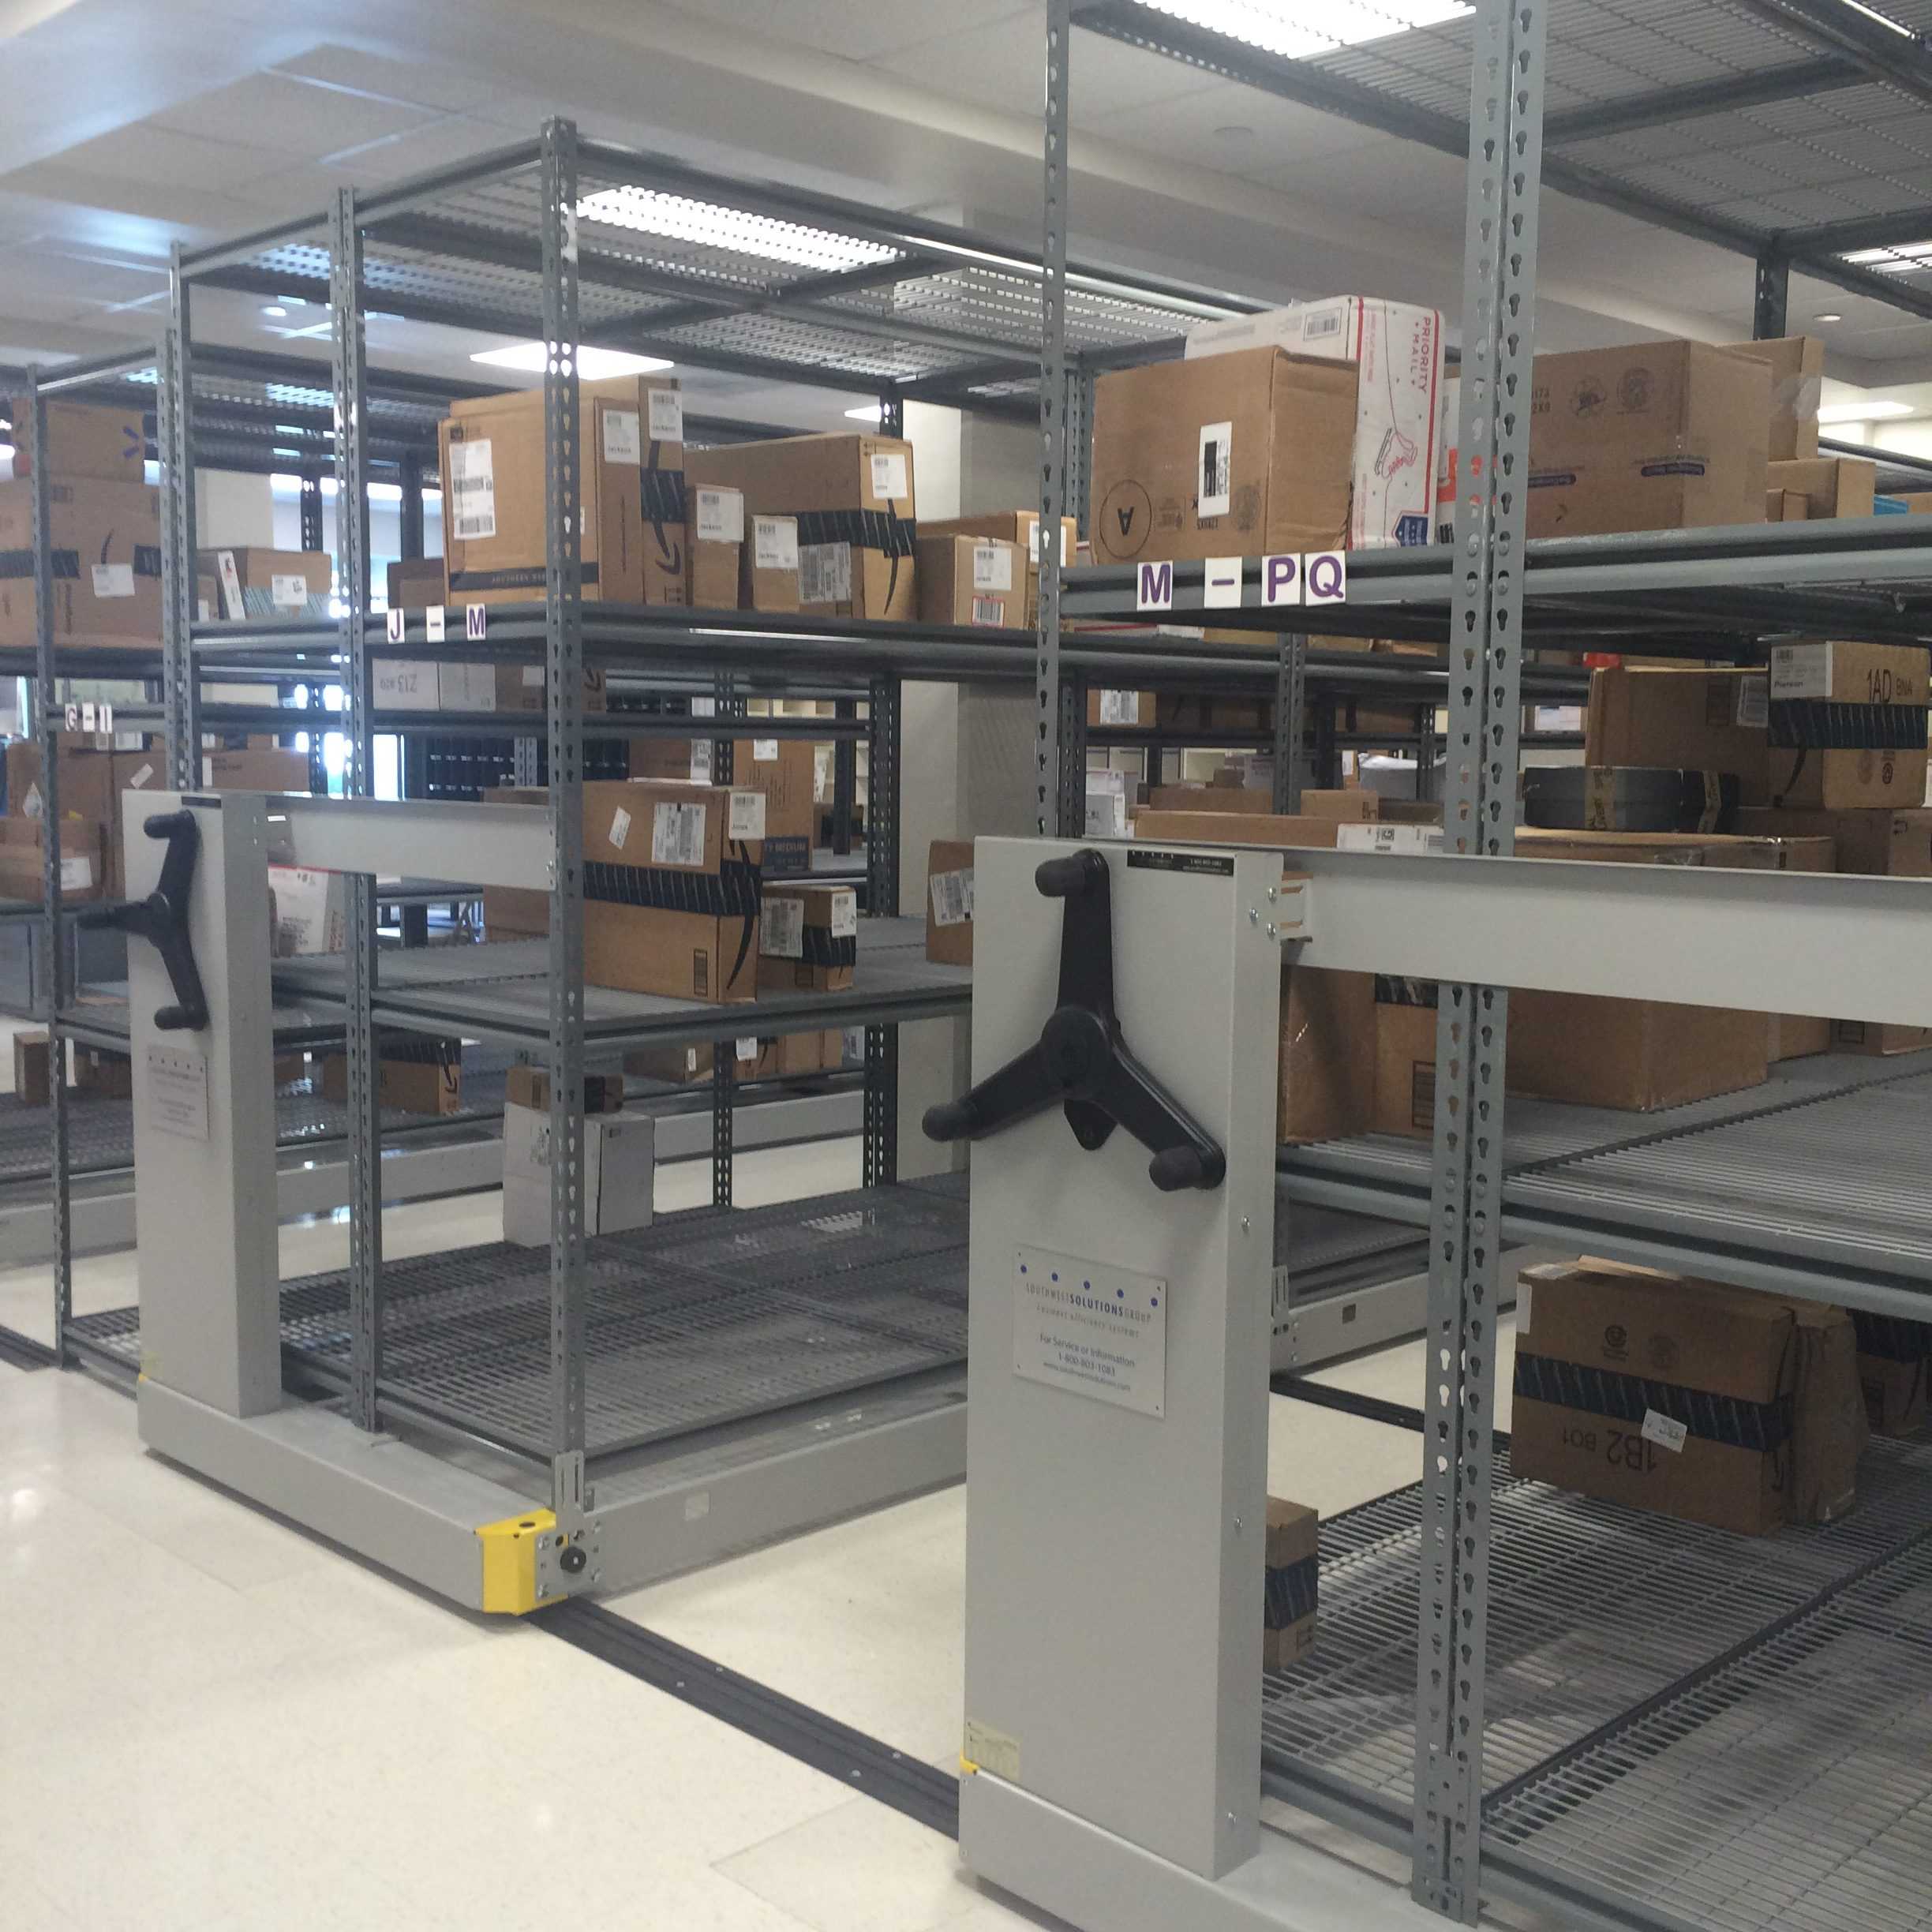 The new high density shelves are used to store more packages.